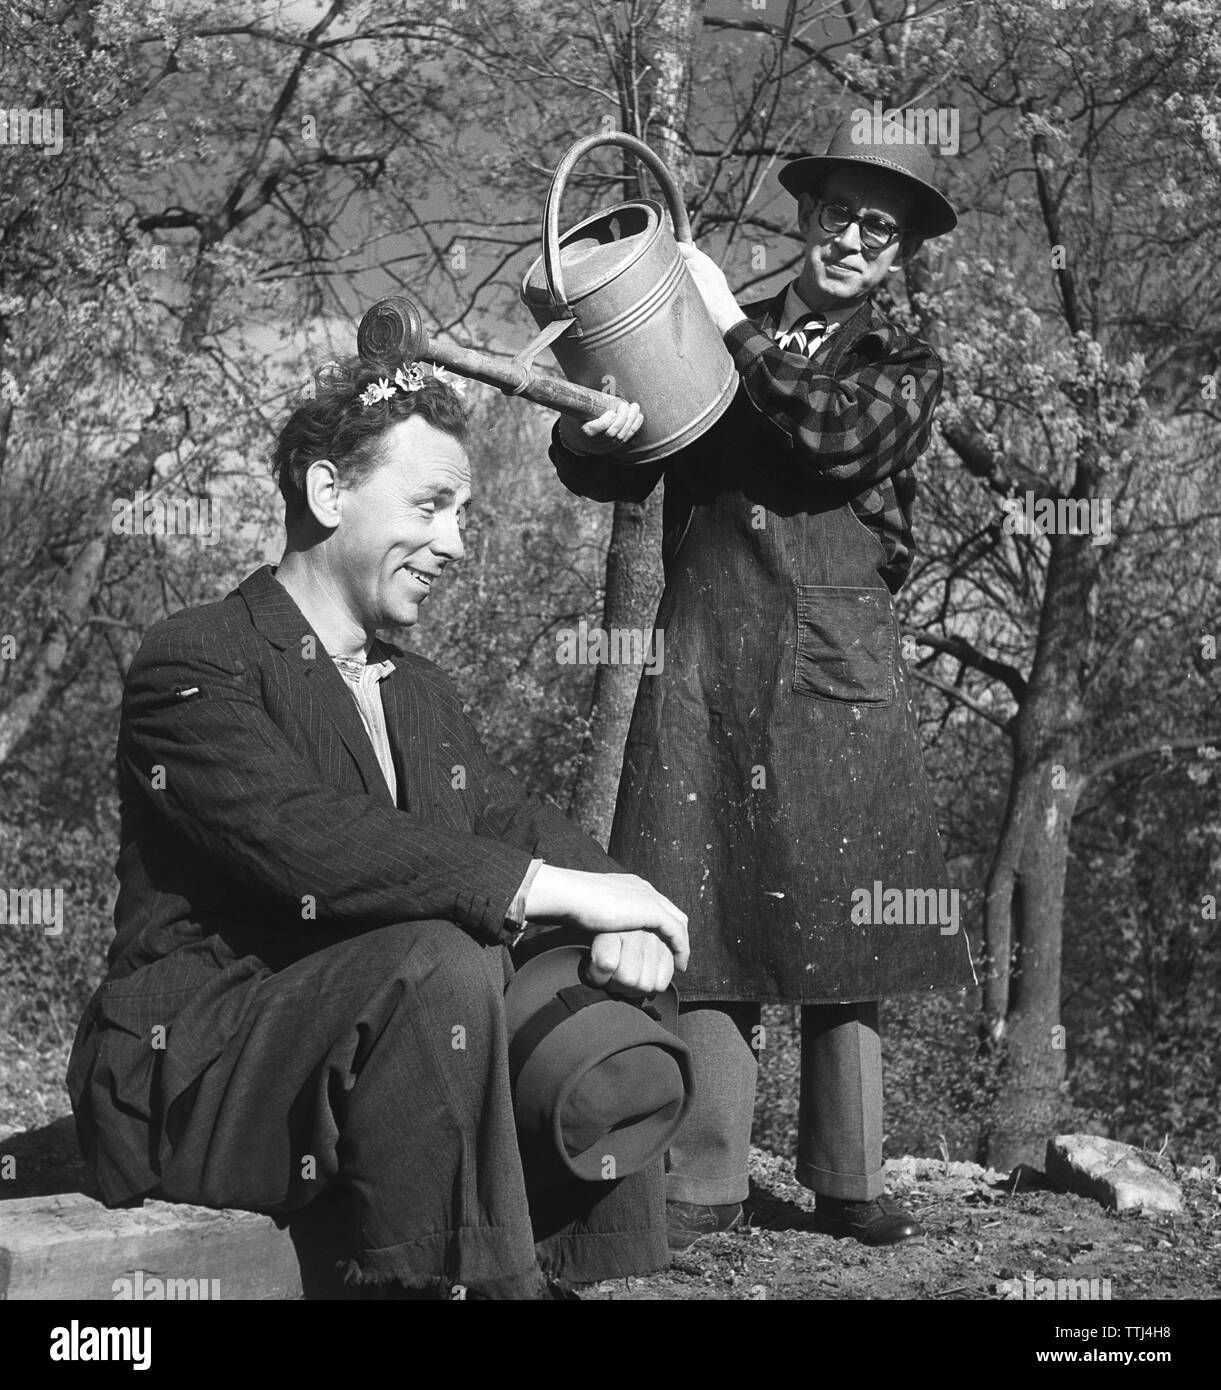 Fun in the 1950s. One man is watering another man. Sweden 1951 Kristoffersson BD30-10 Stock Photo